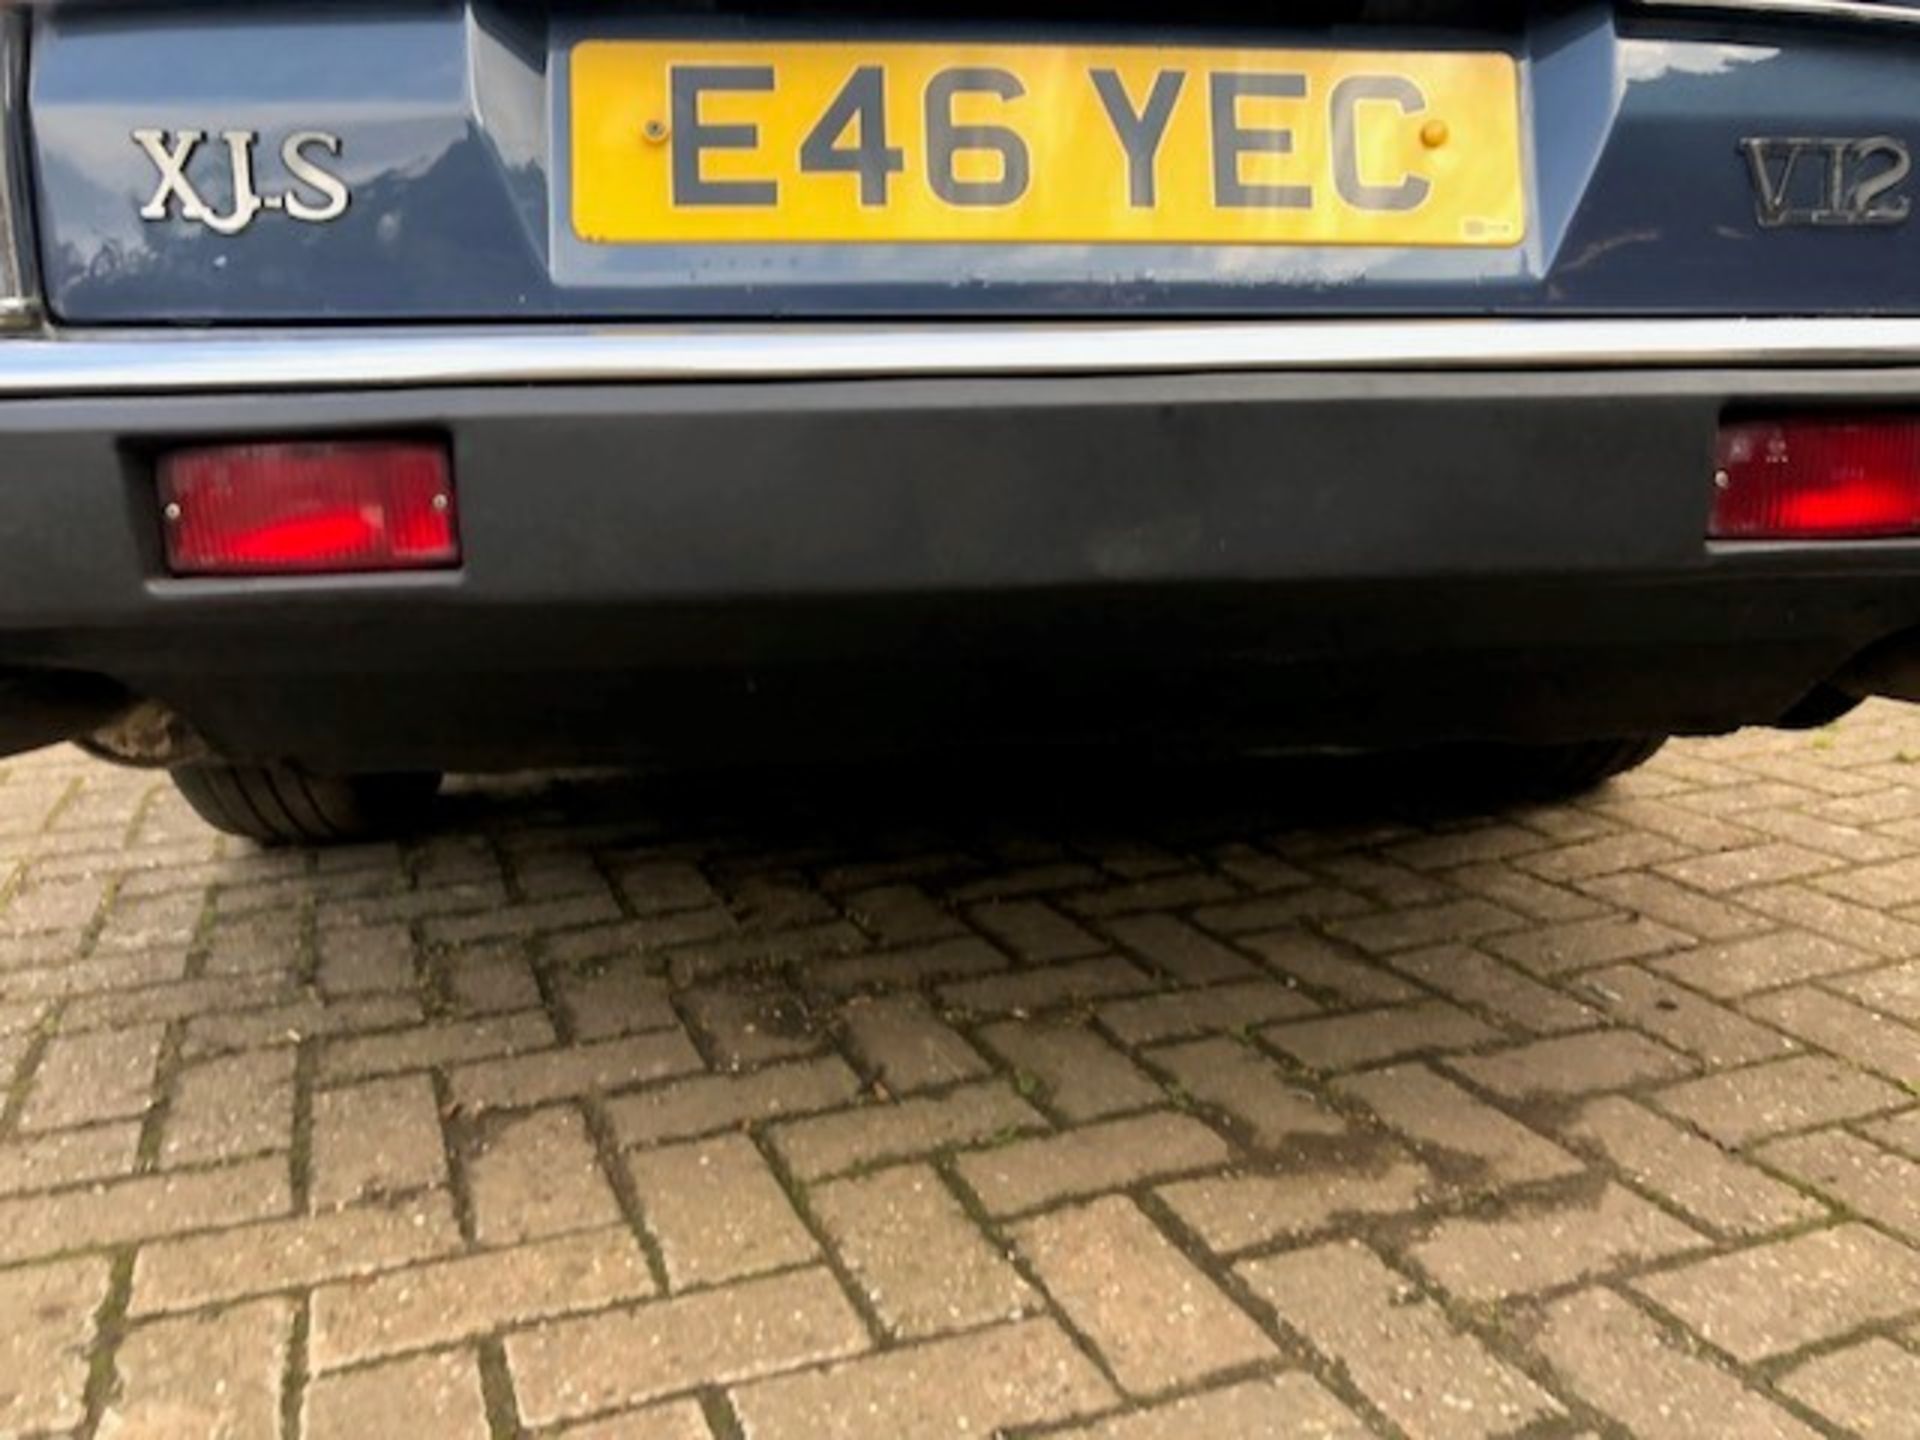 1988 Jaguar XJ-S HE Auto Registration number E46 YEC Bought in 1997 Last driven in 1999 26,540 - Image 46 of 49